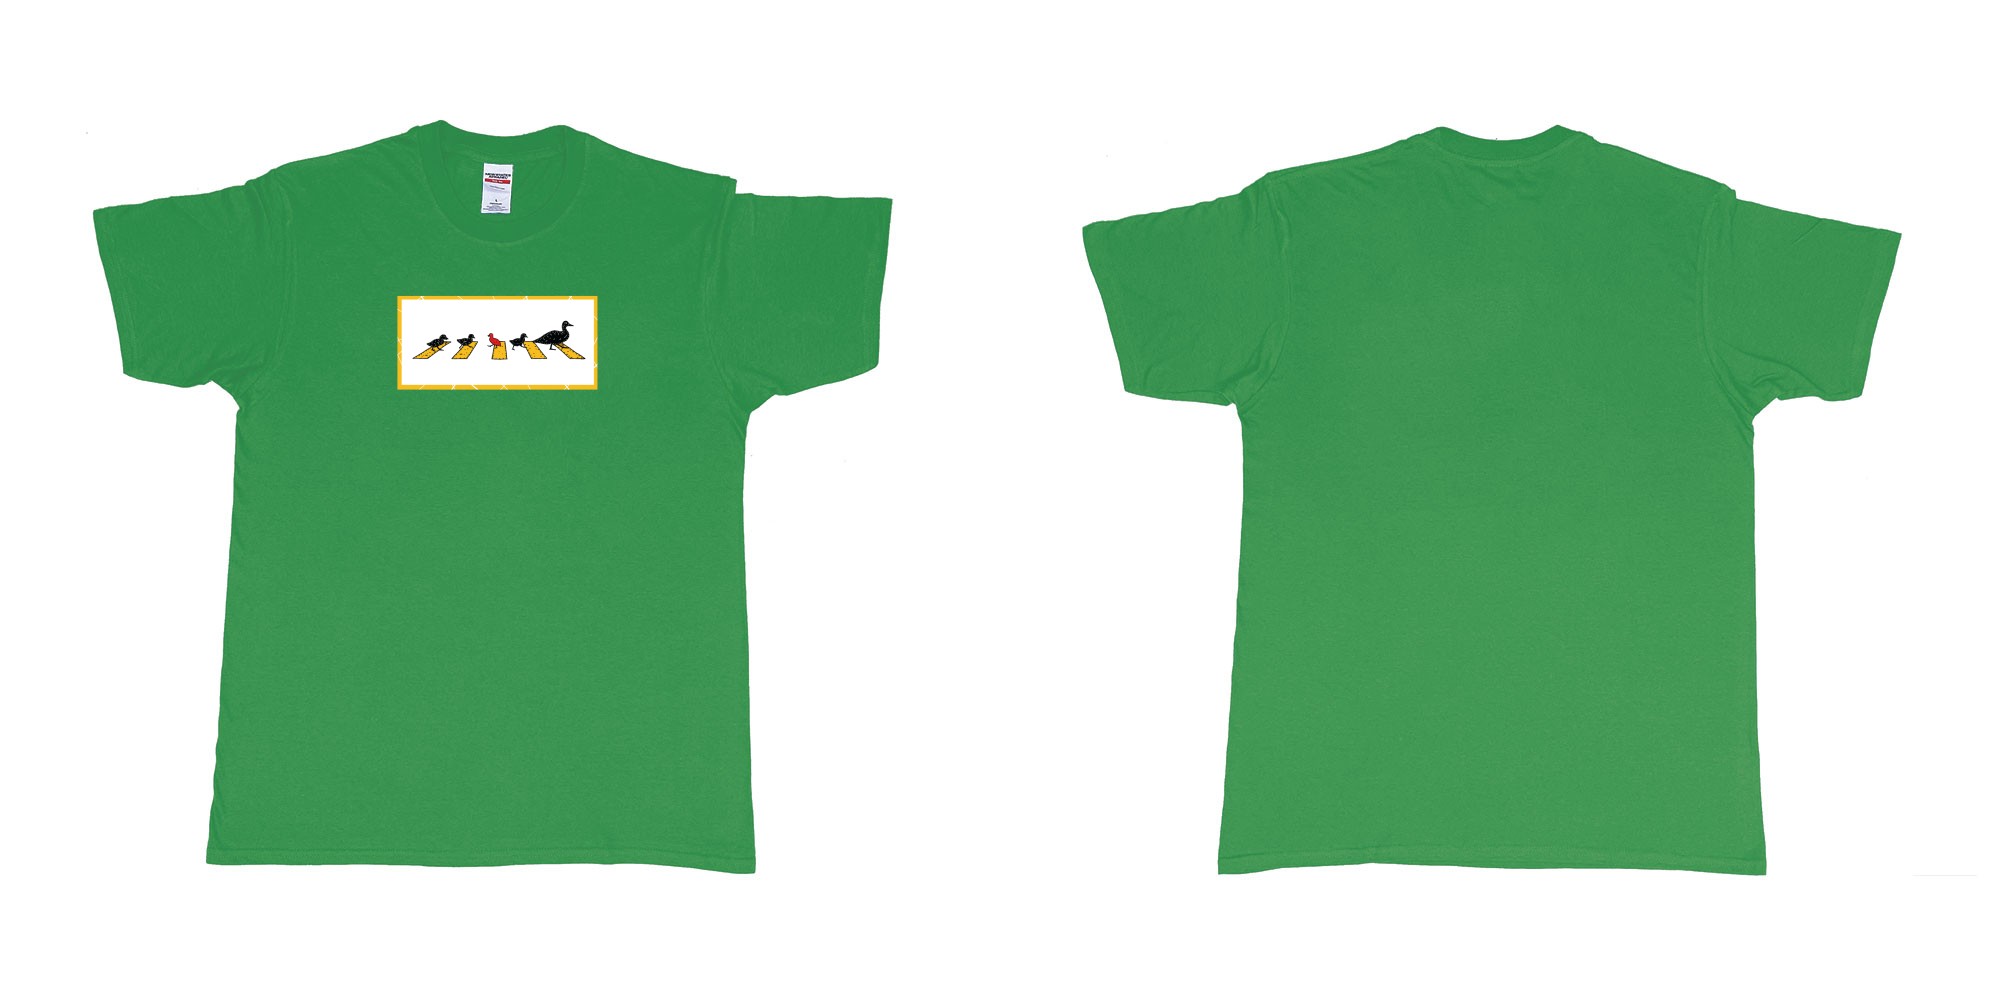 Custom tshirt design 4481 ducks in fabric color irish-green choice your own text made in Bali by The Pirate Way